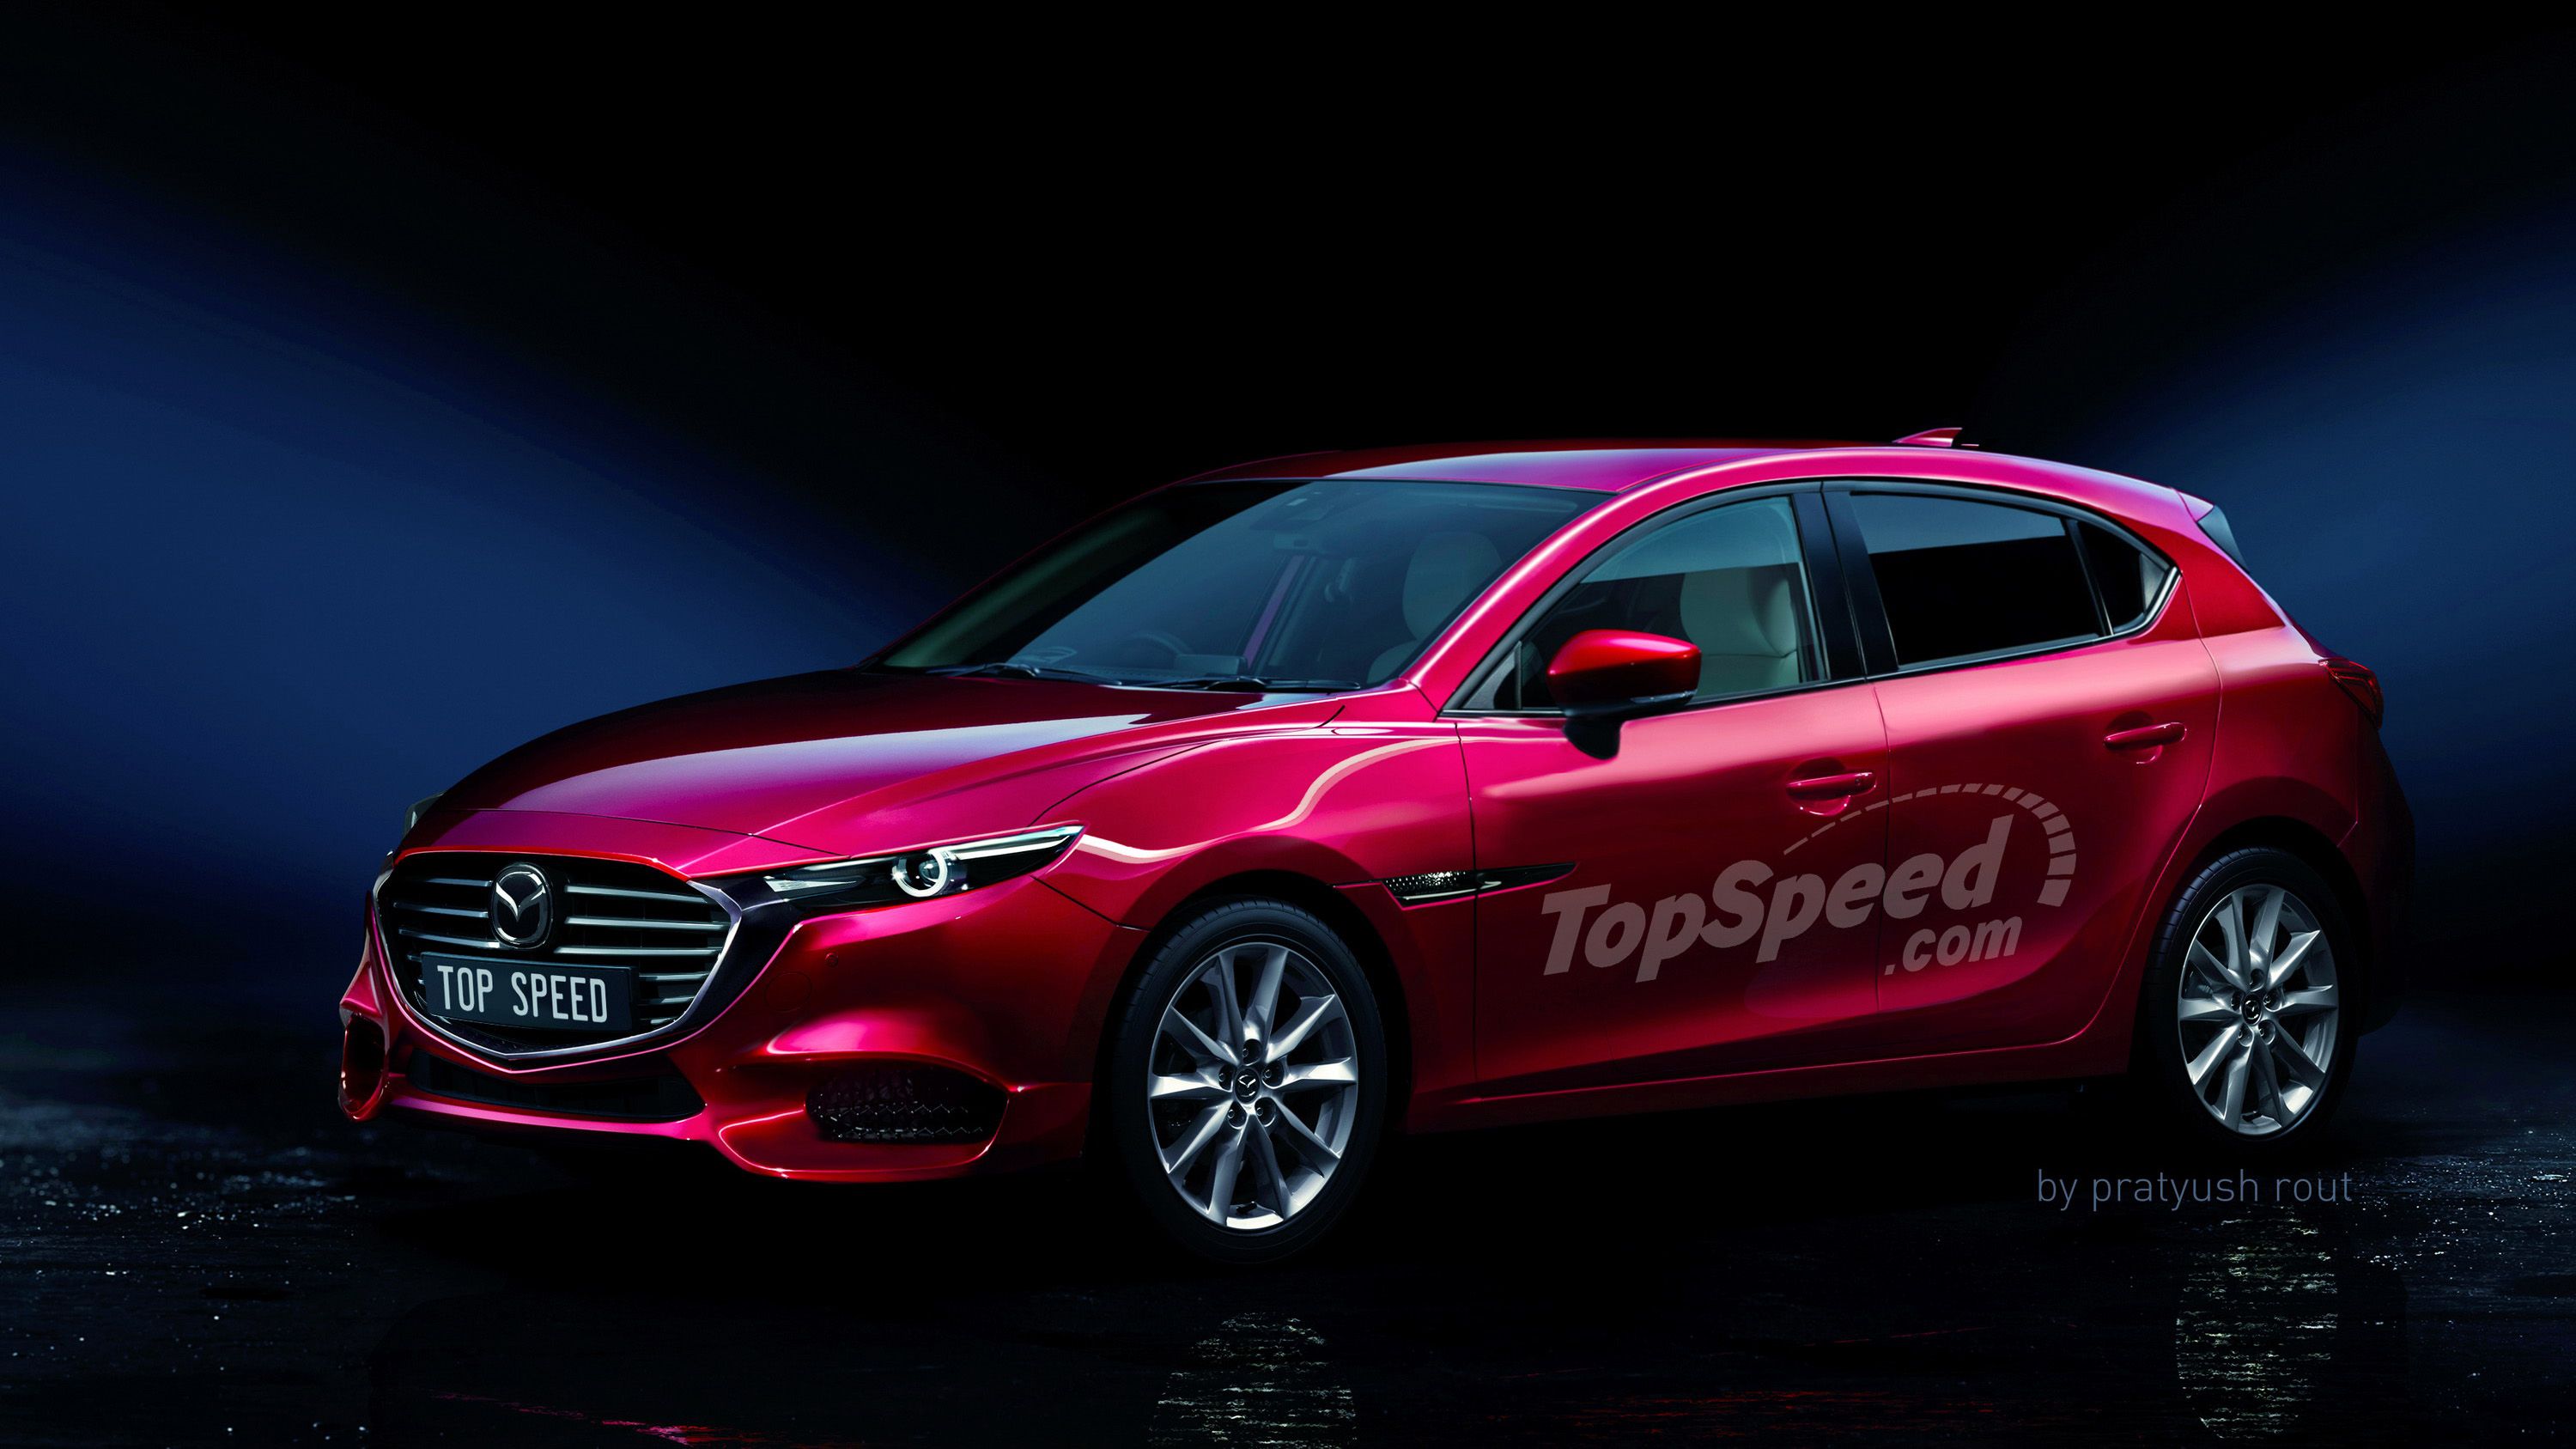 2018 The New Mazda 3 is Inspired by the Kai Concept and Will Debut at the Los Angeles Auto Show!